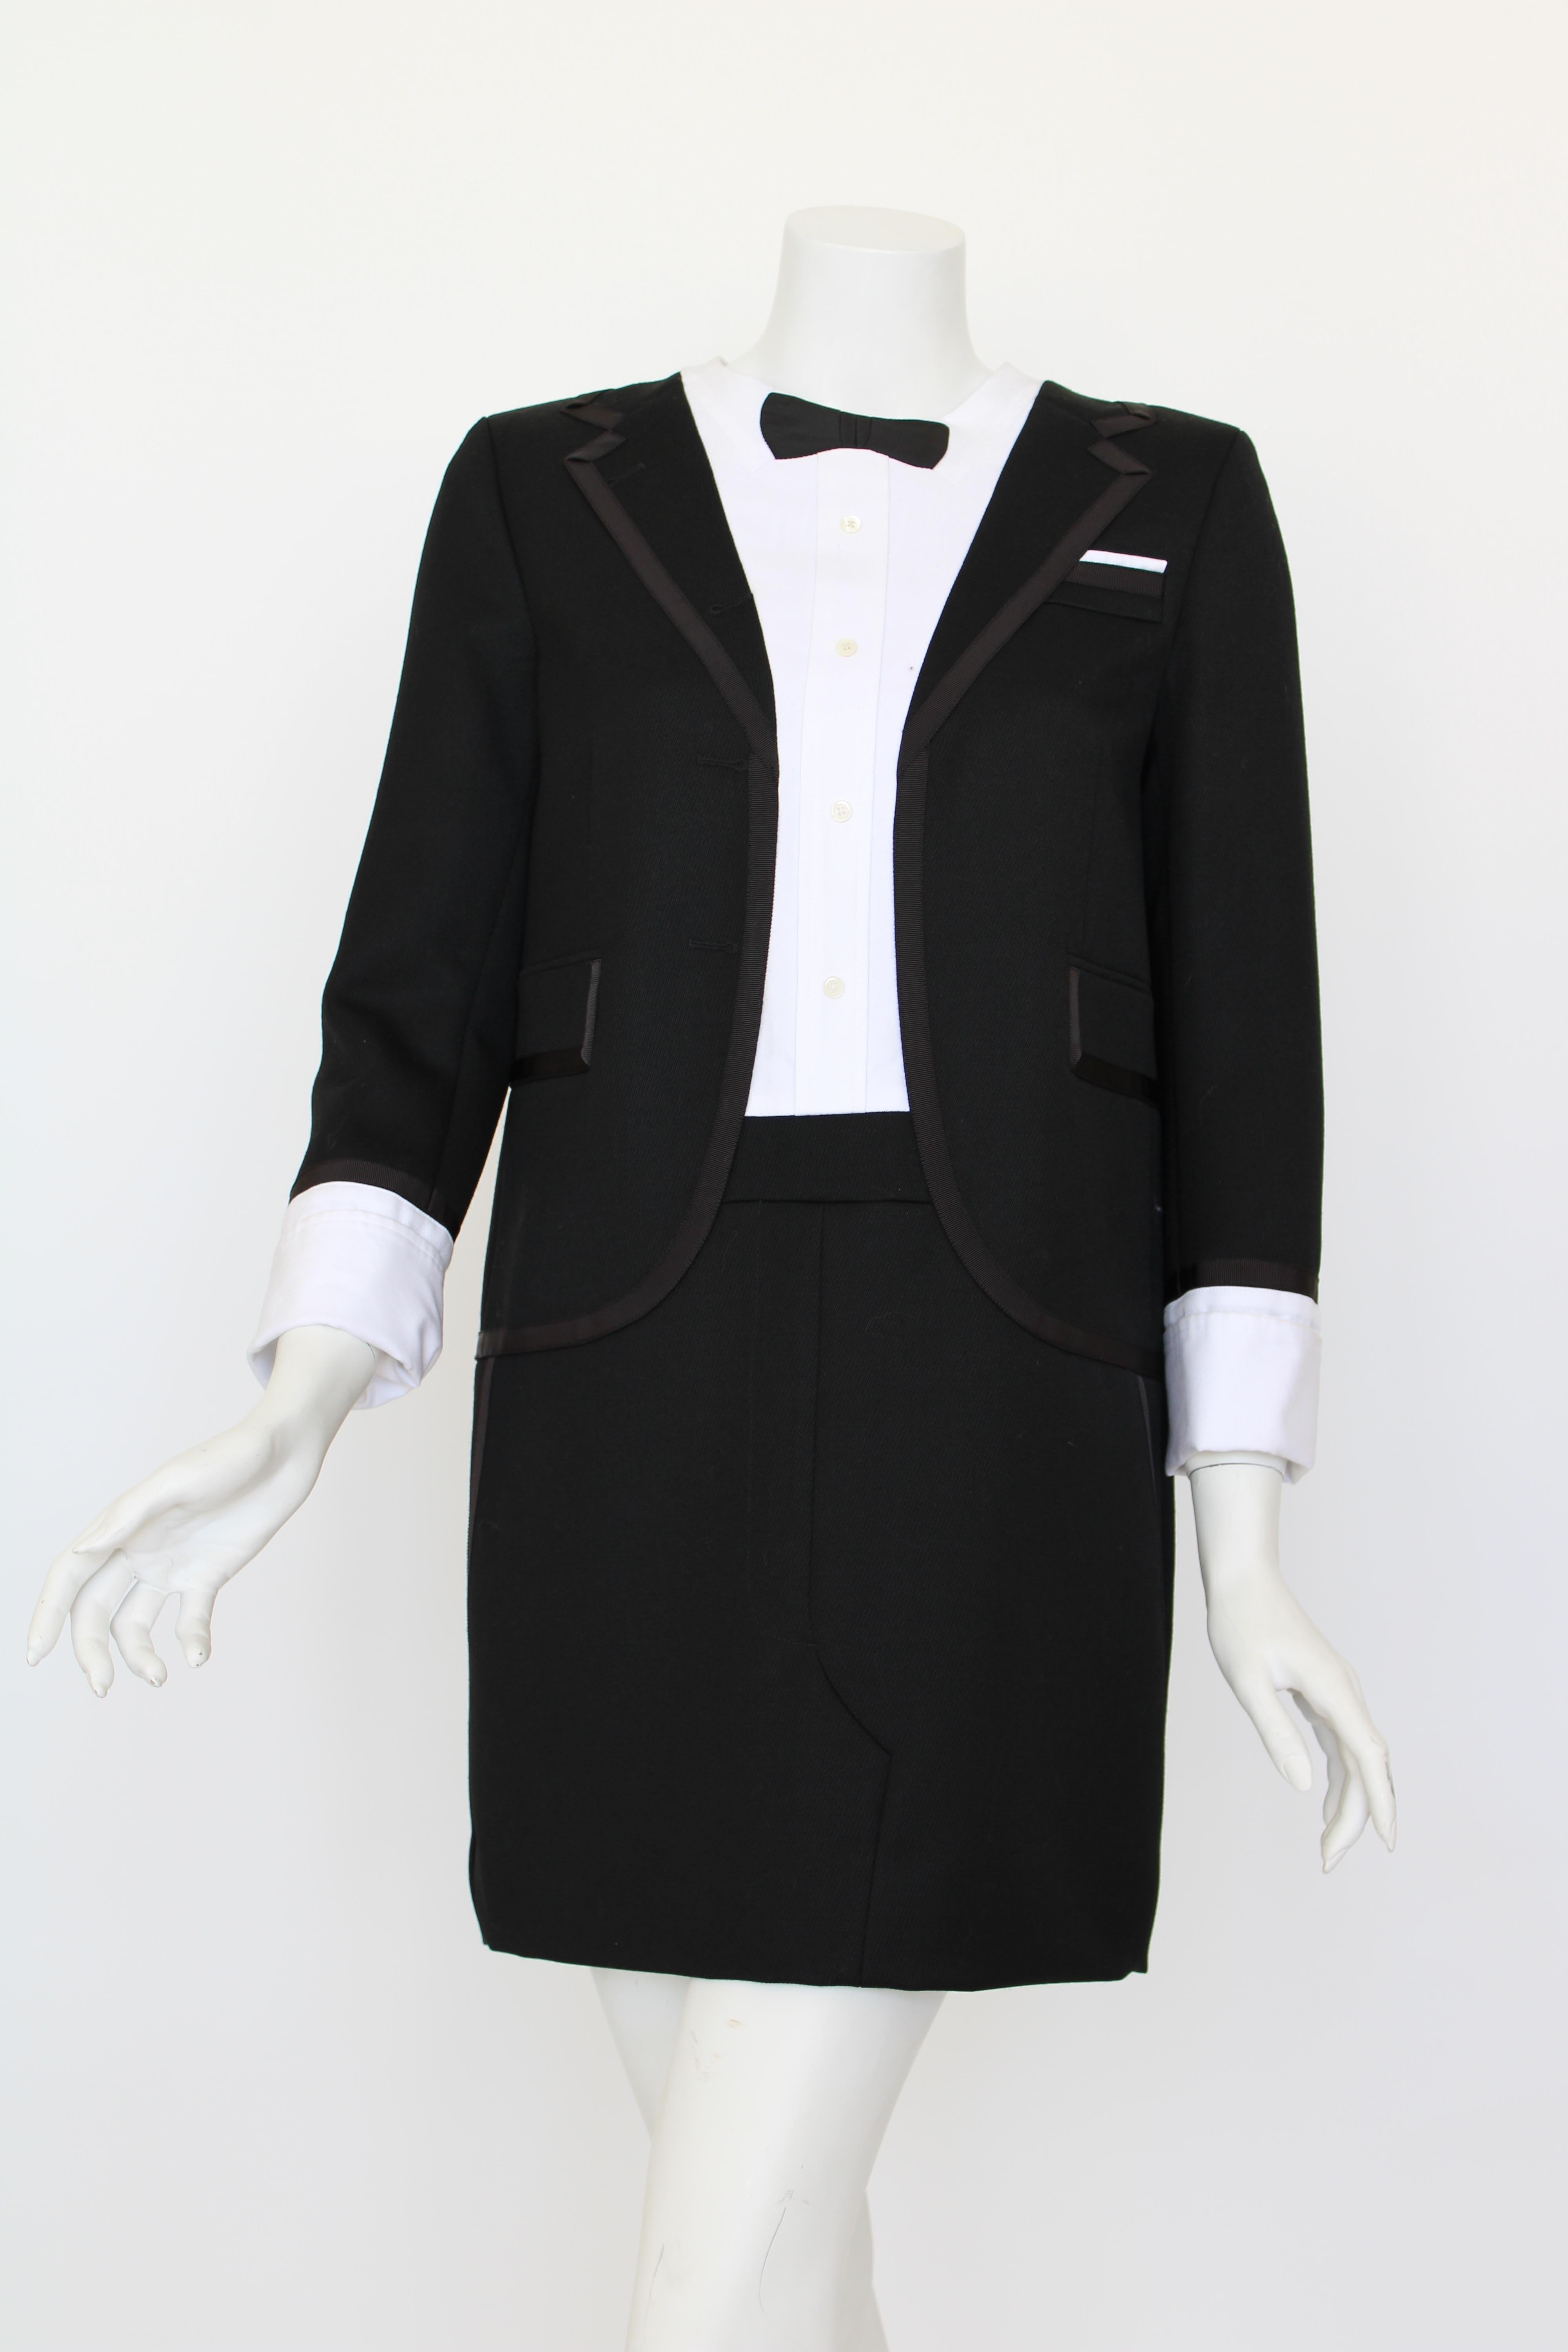 Black/white wool-cotton-silk blend tuxedo-style mini dress from Thom Browne featuring round neck, signature grosgrain loop tab, RWB stripe, long sleeves, buttoned cuffs and a tuxedo style. 